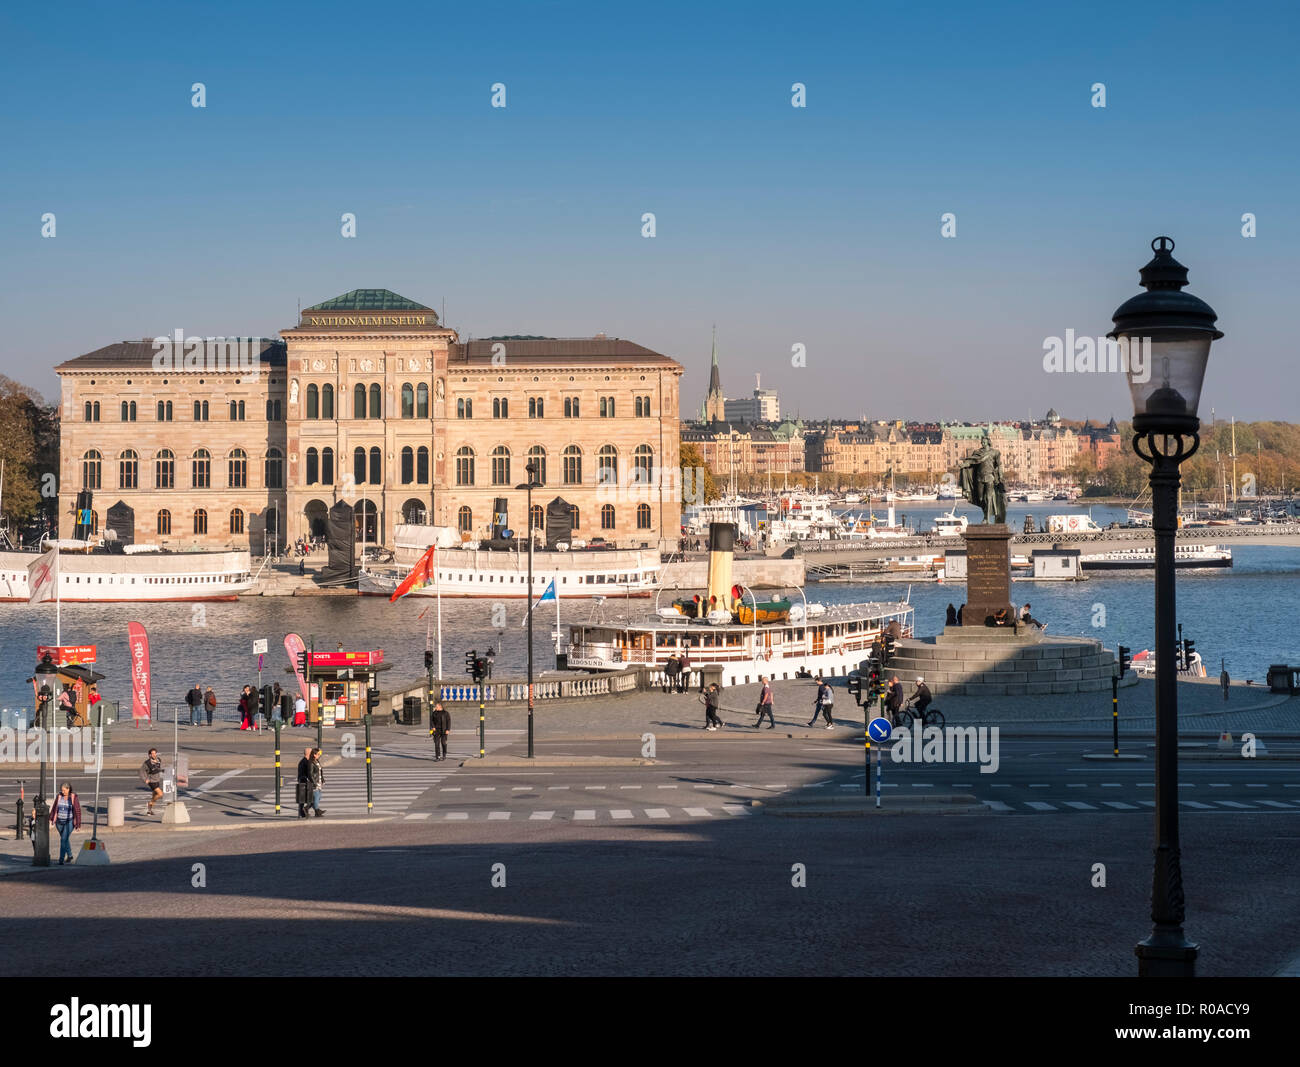 Stockholm waterfront cityscape, with the National Museum building in the background, Blasieholmen, Stockholm, Sweden. Stock Photo